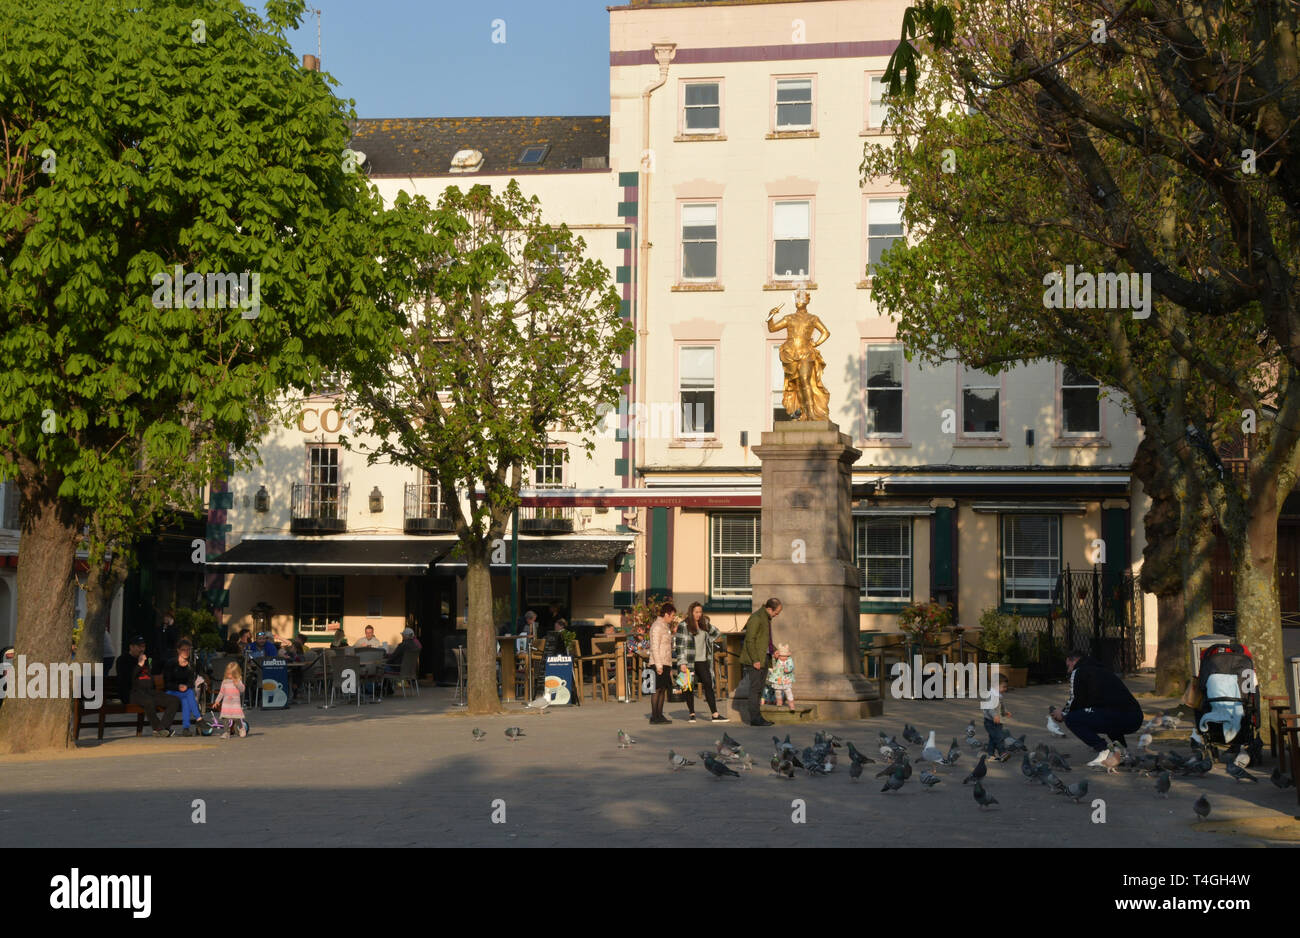 Spring sunshine enjoyed by visitors beneath the statue of King George II in the Royal Square, St Helier,Jersey, Channel islands Stock Photo